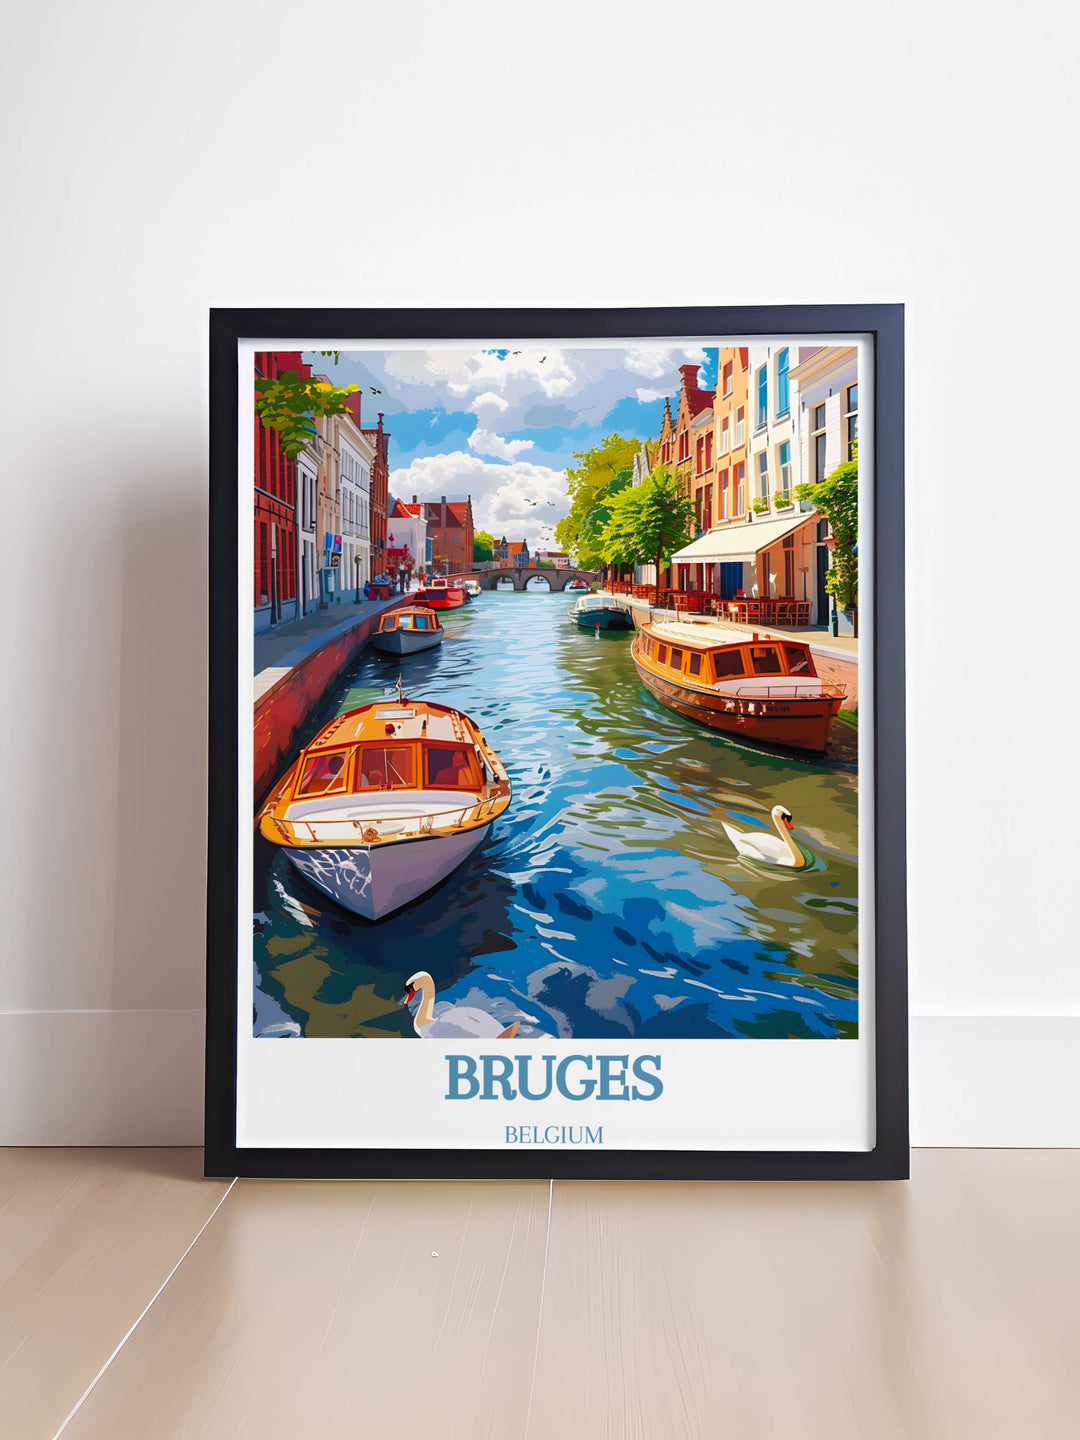 Panoramic view of the canal of Bruges during a festival, lively and colorful, captured in a detailed travel poster